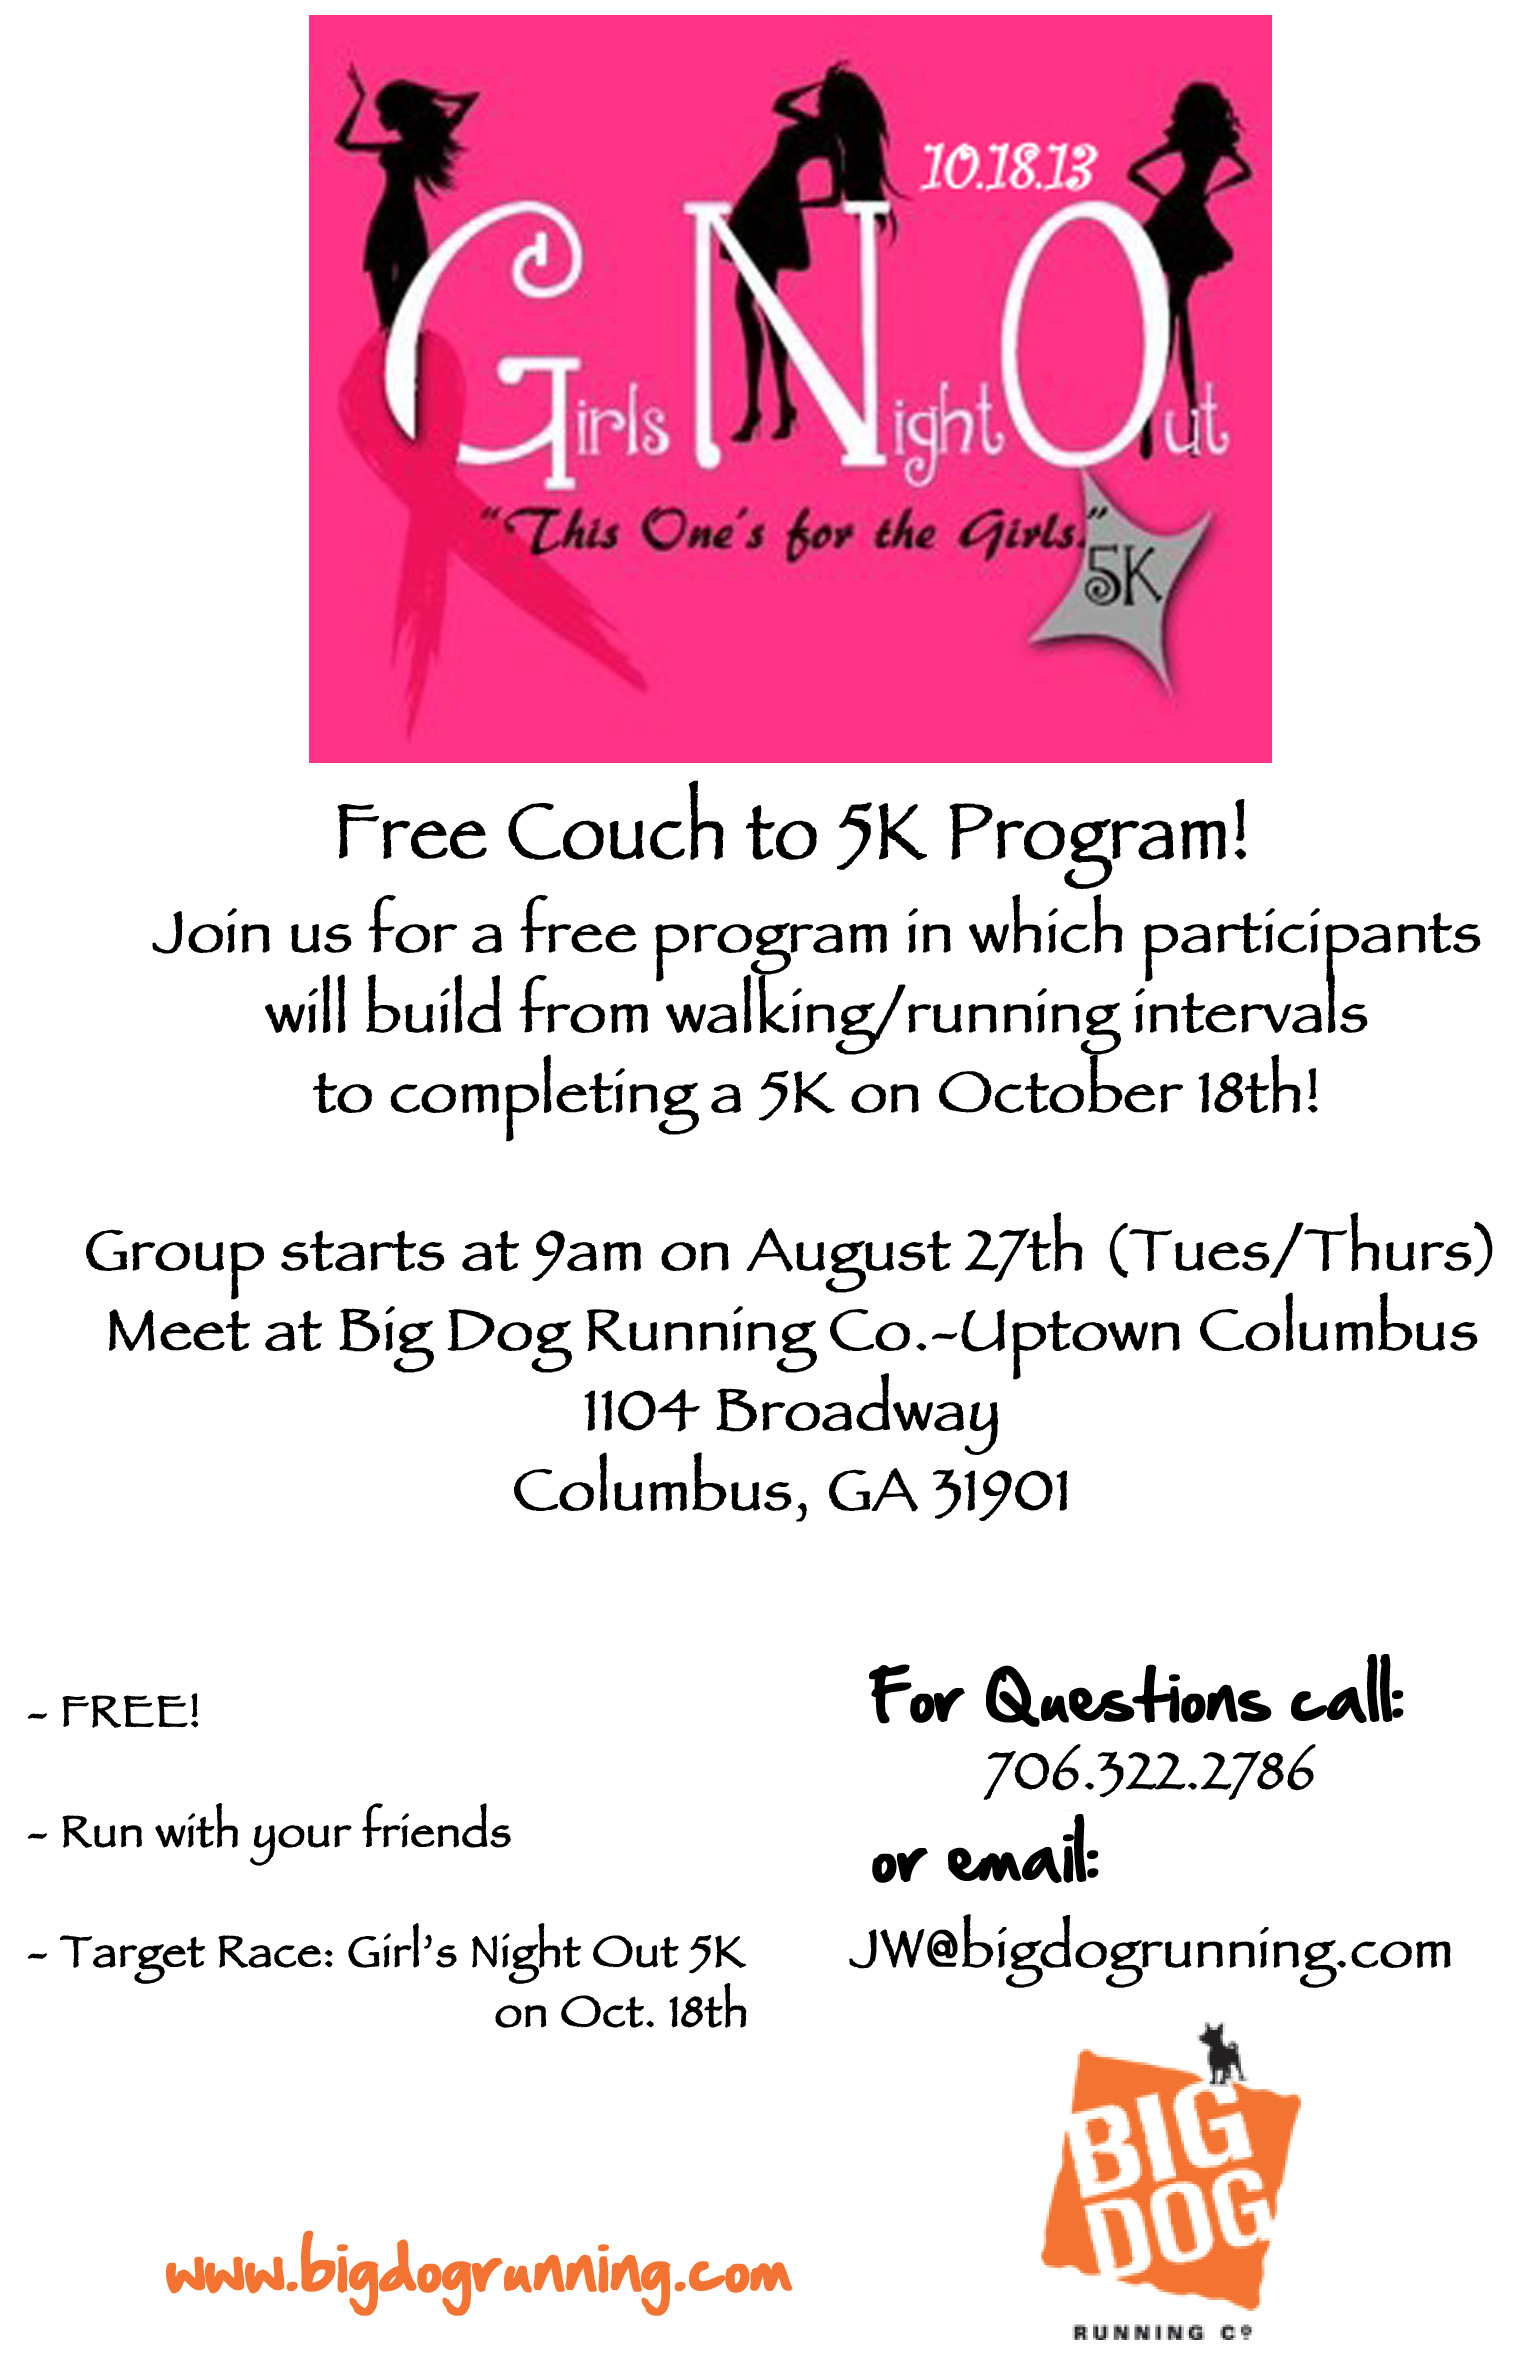 Free Couch to 5k Program at Big Dog Running Company